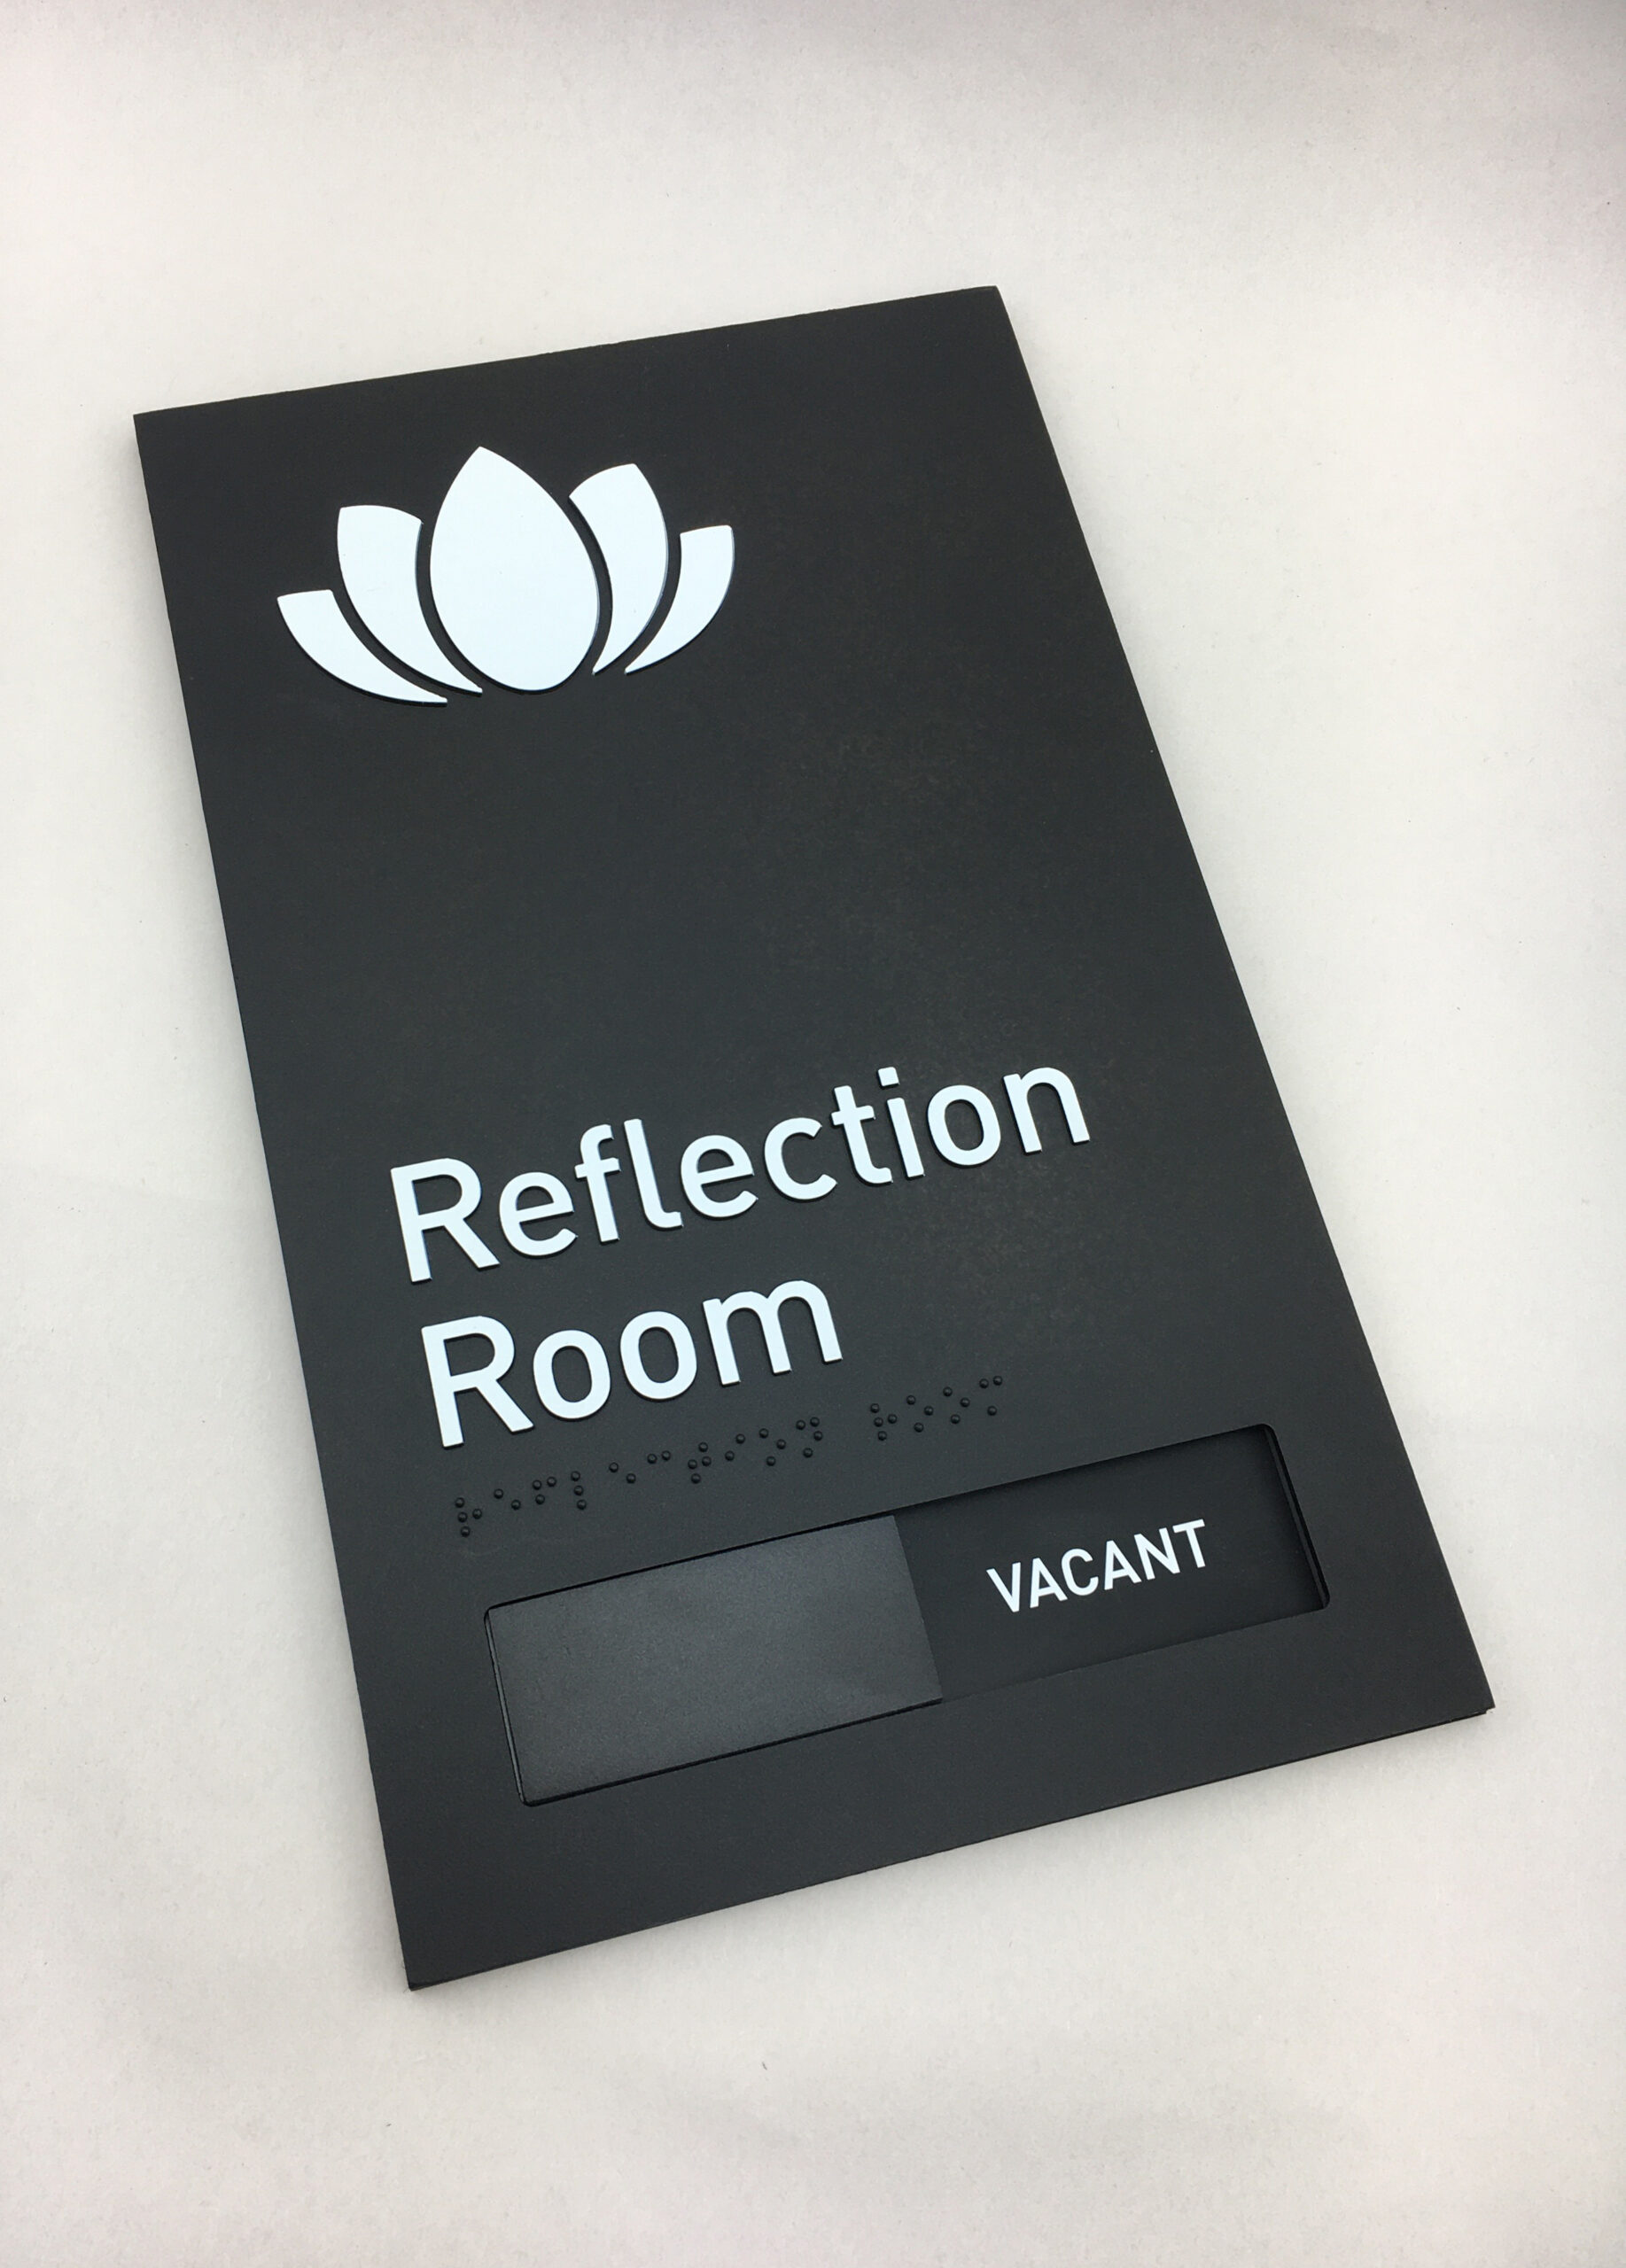 Custom Moulded Acrylic Braille Sign with integrated Slider